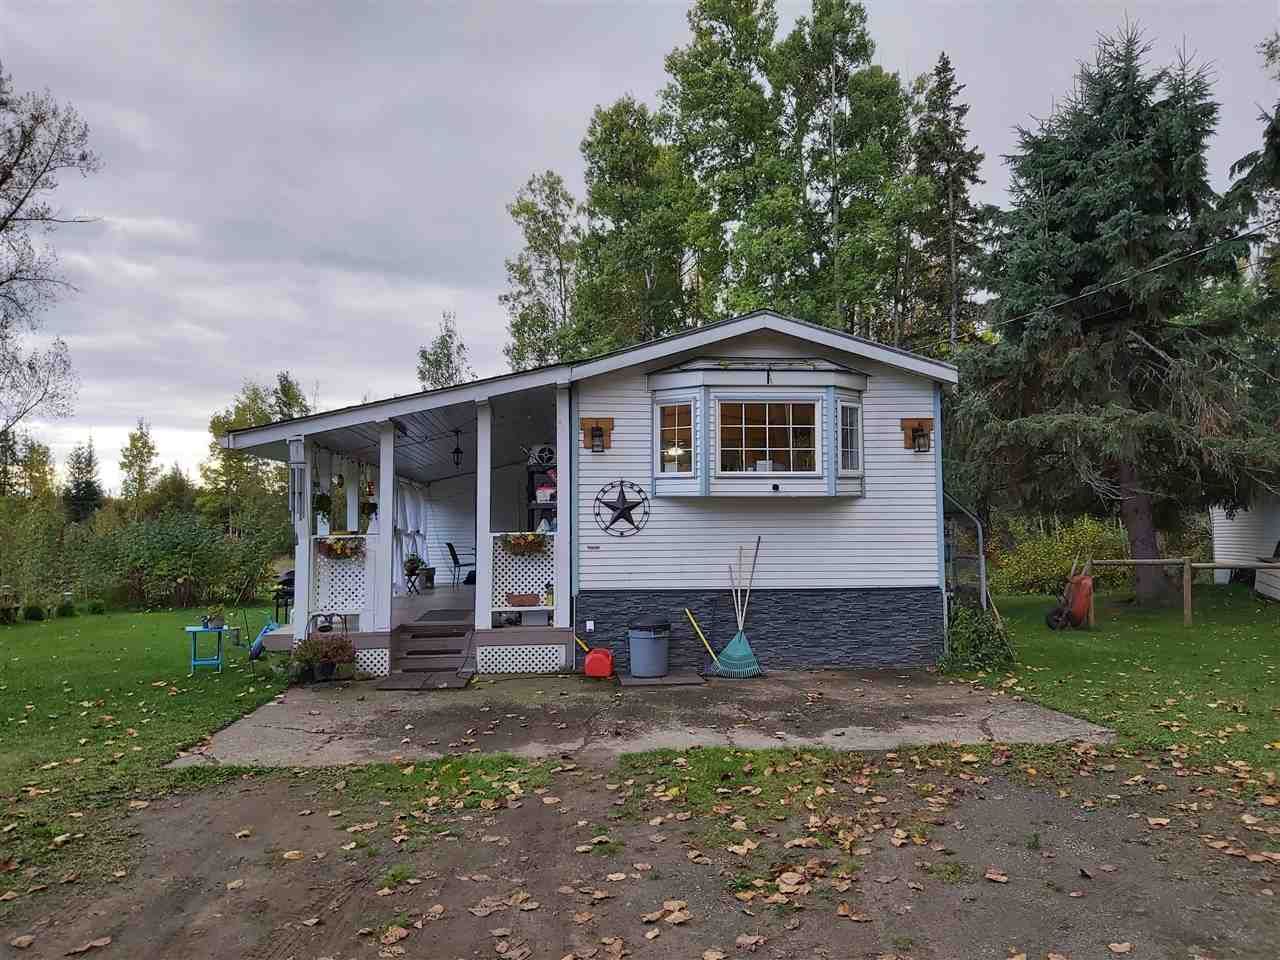 Main Photo: 6735 SALMON VALLEY Road: Salmon Valley Manufactured Home for sale (PG Rural North (Zone 76))  : MLS®# R2502333